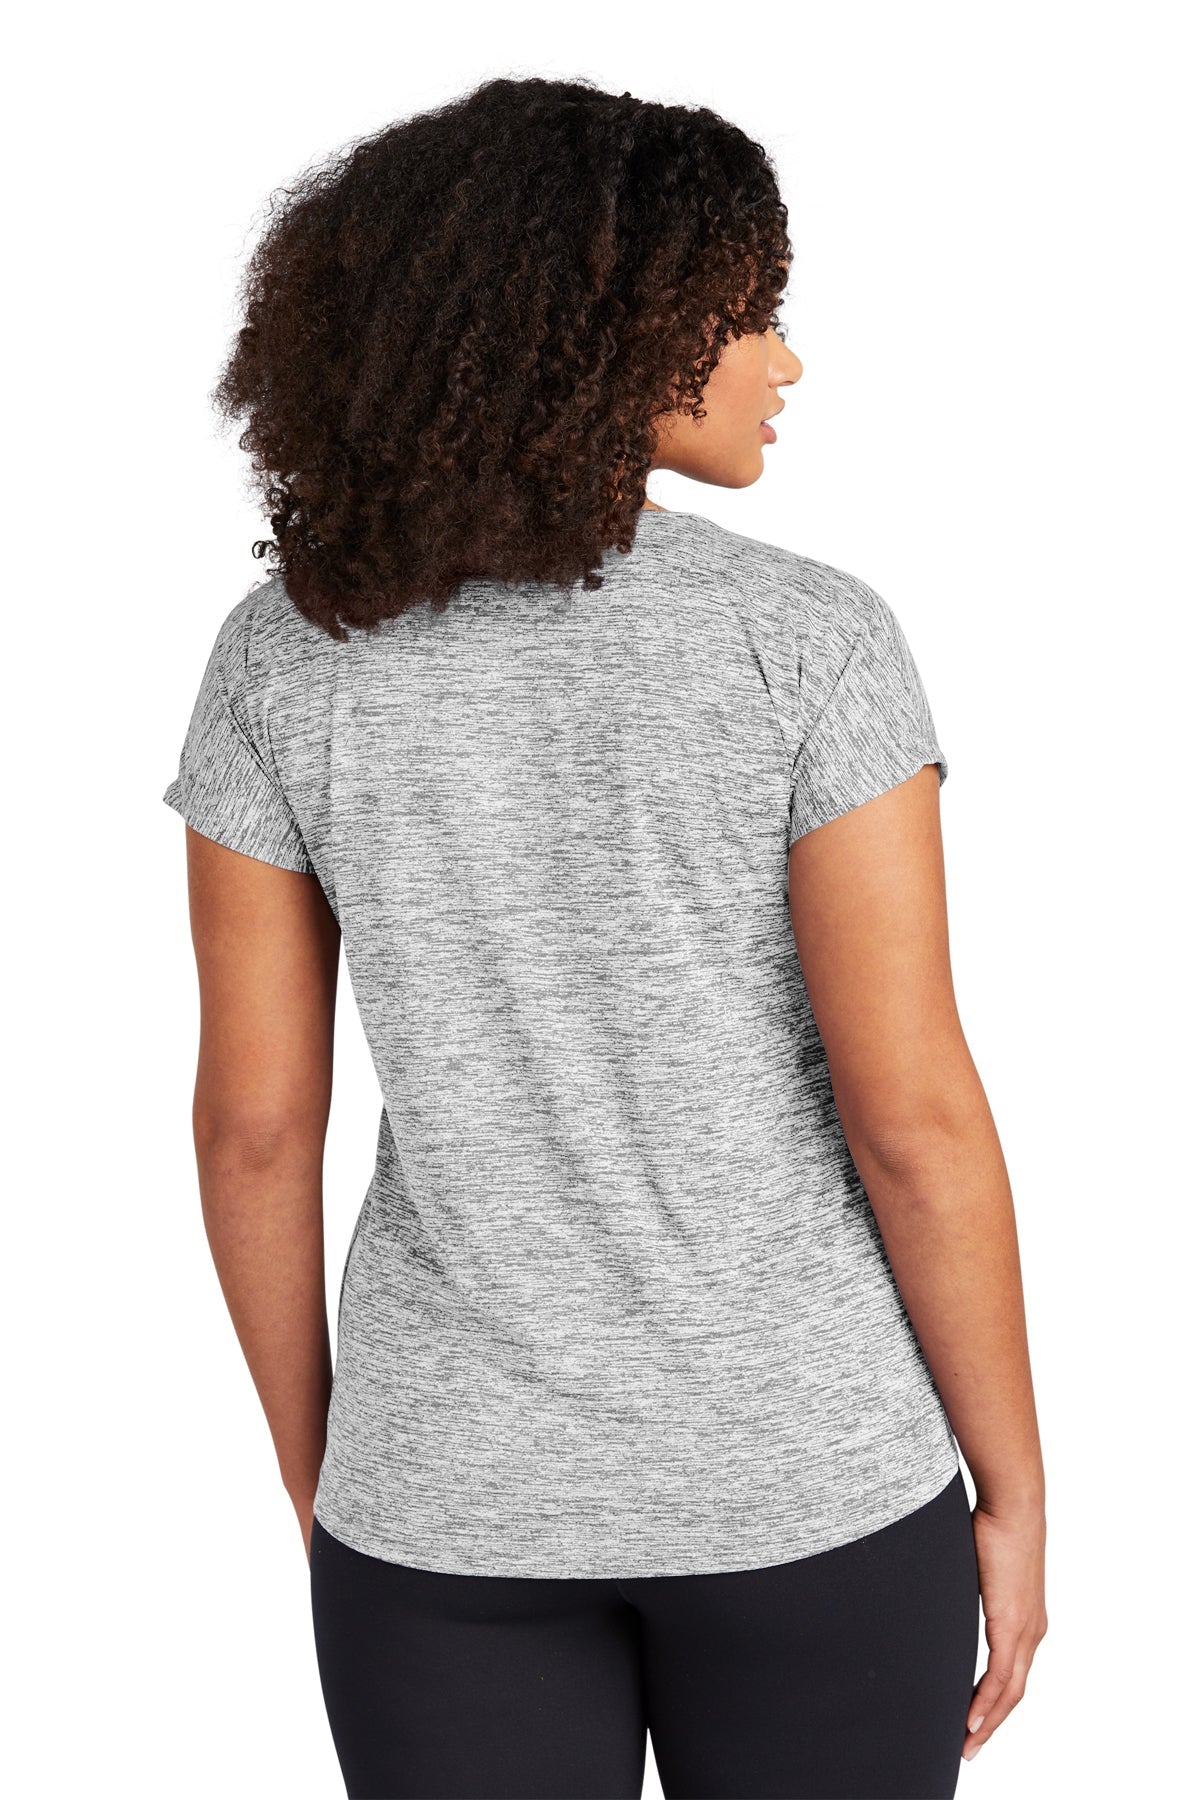 Sport-Tek Ladies PosiCharge Electric Heather Branded Sporty Tee's, Silver Electric